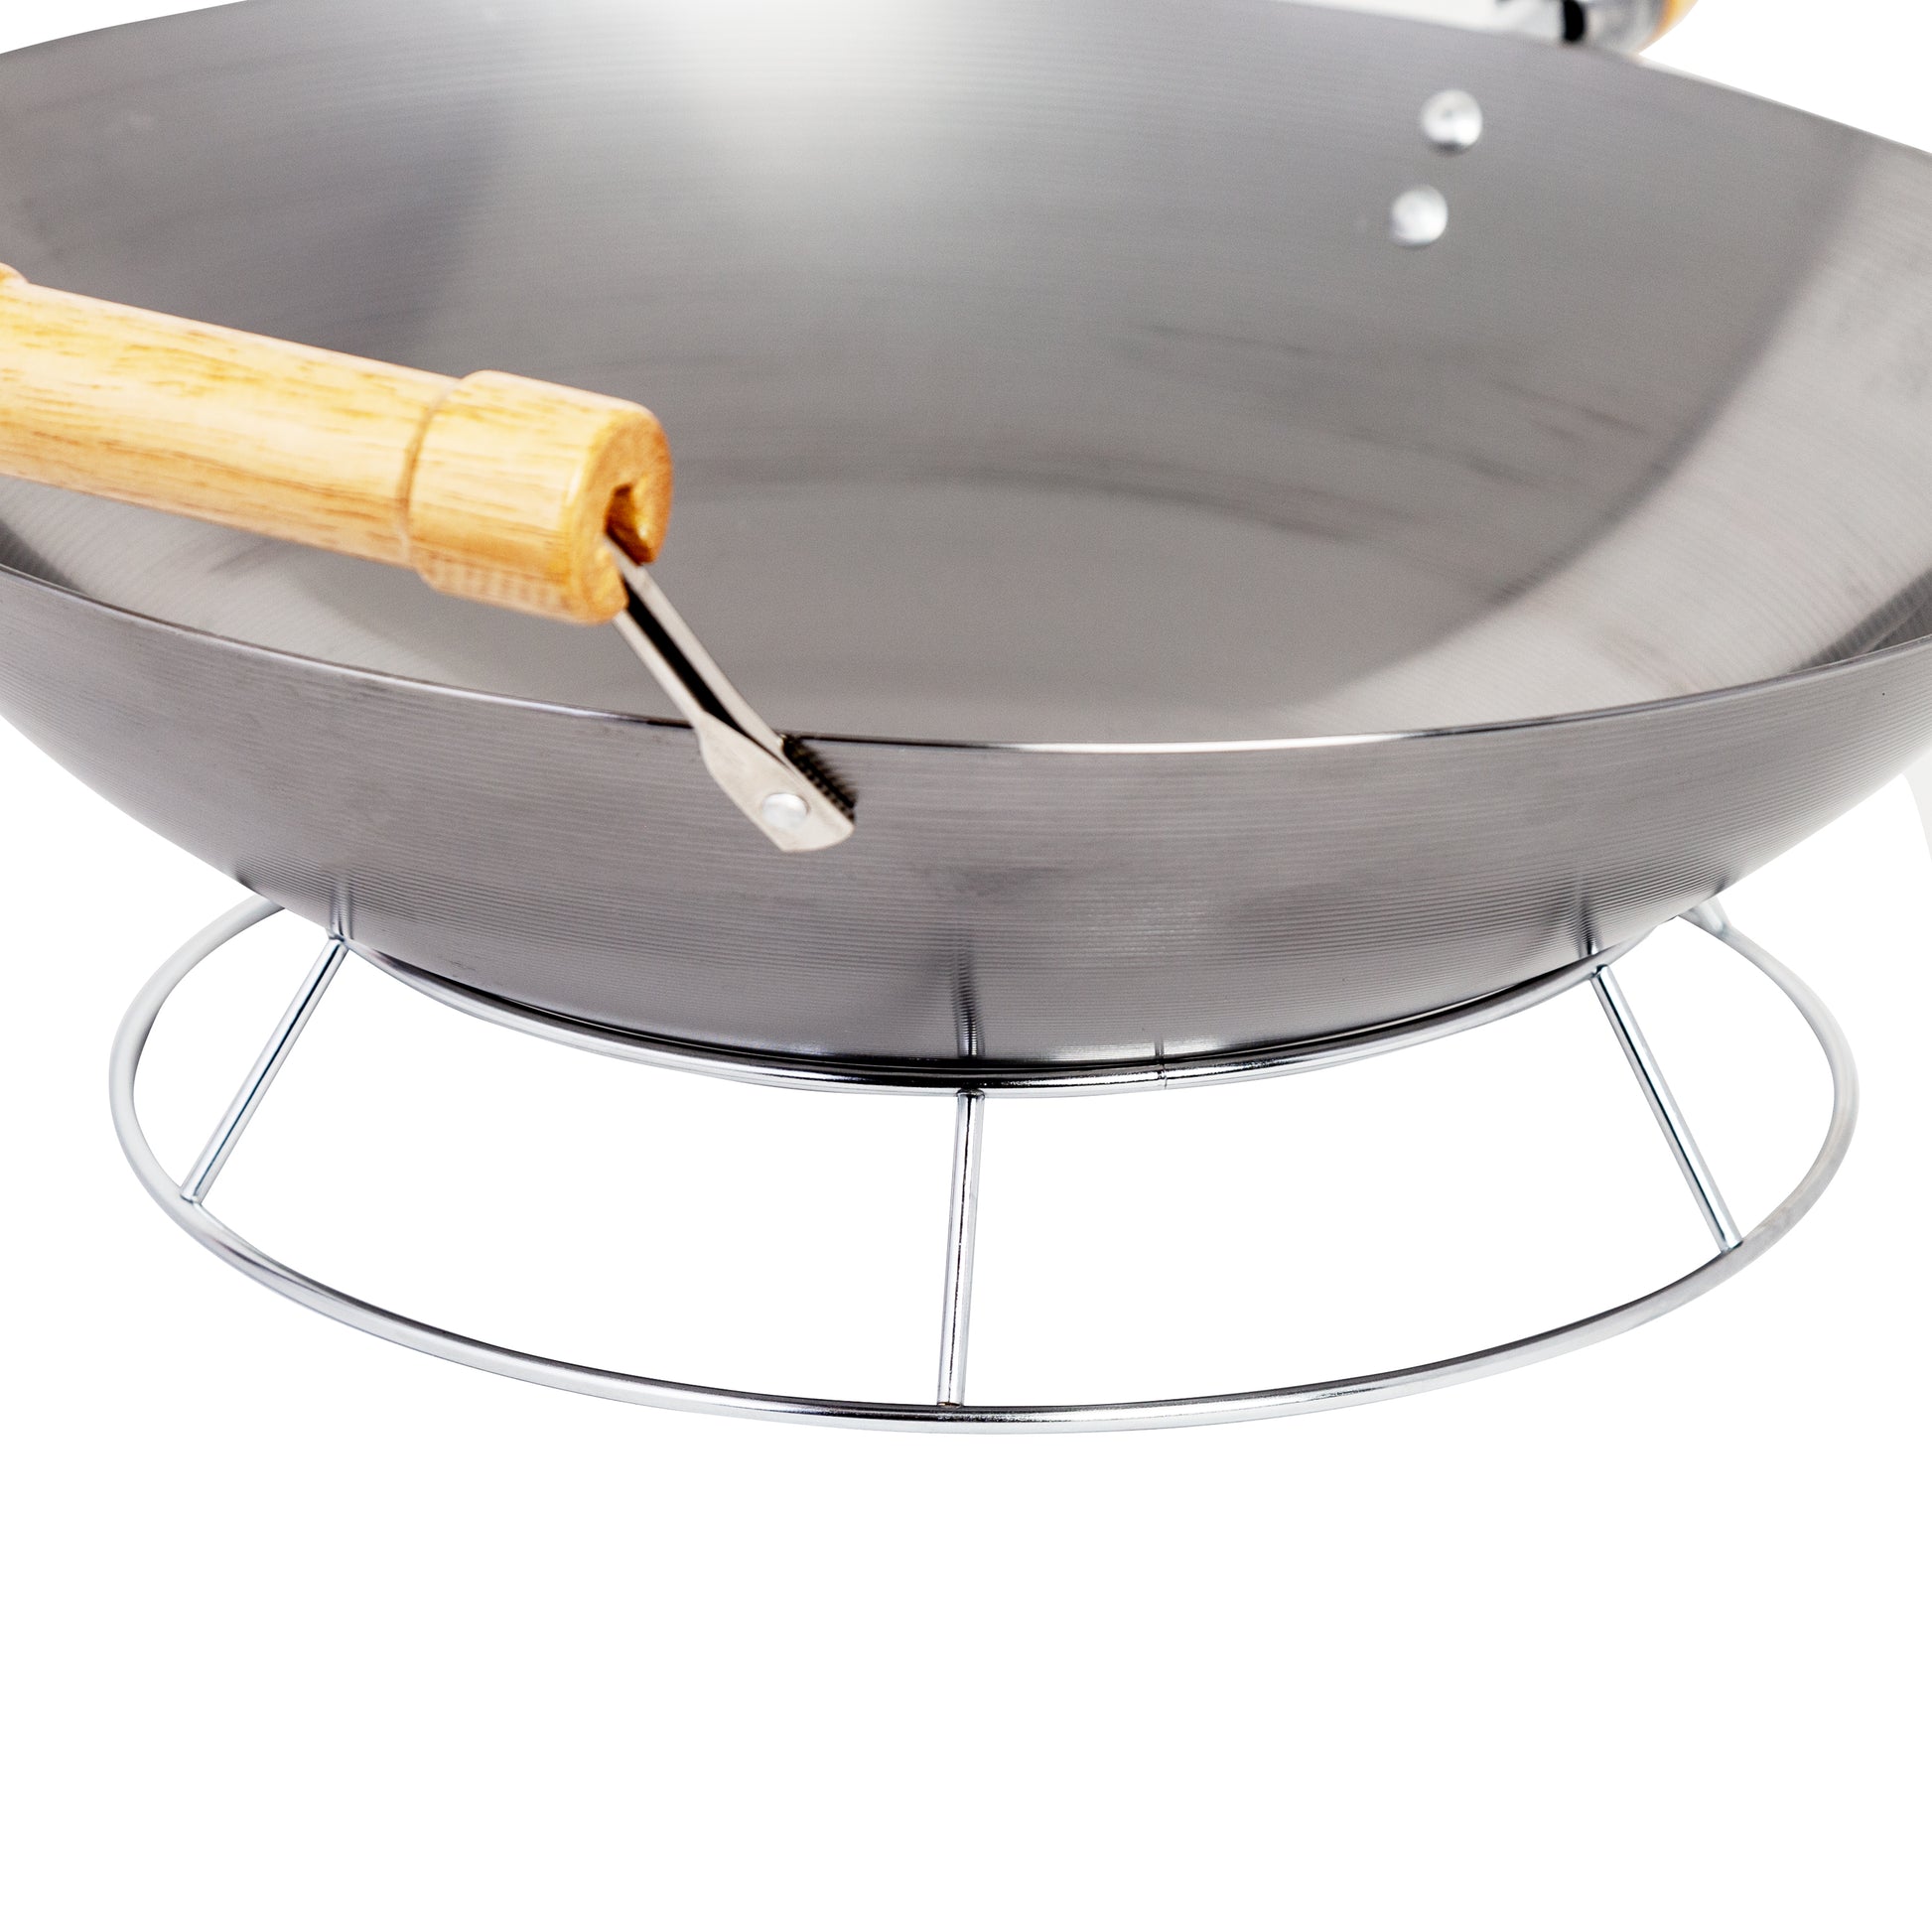 What wok-ring do I need to use a round-bottomed wok? : r/chinesefood